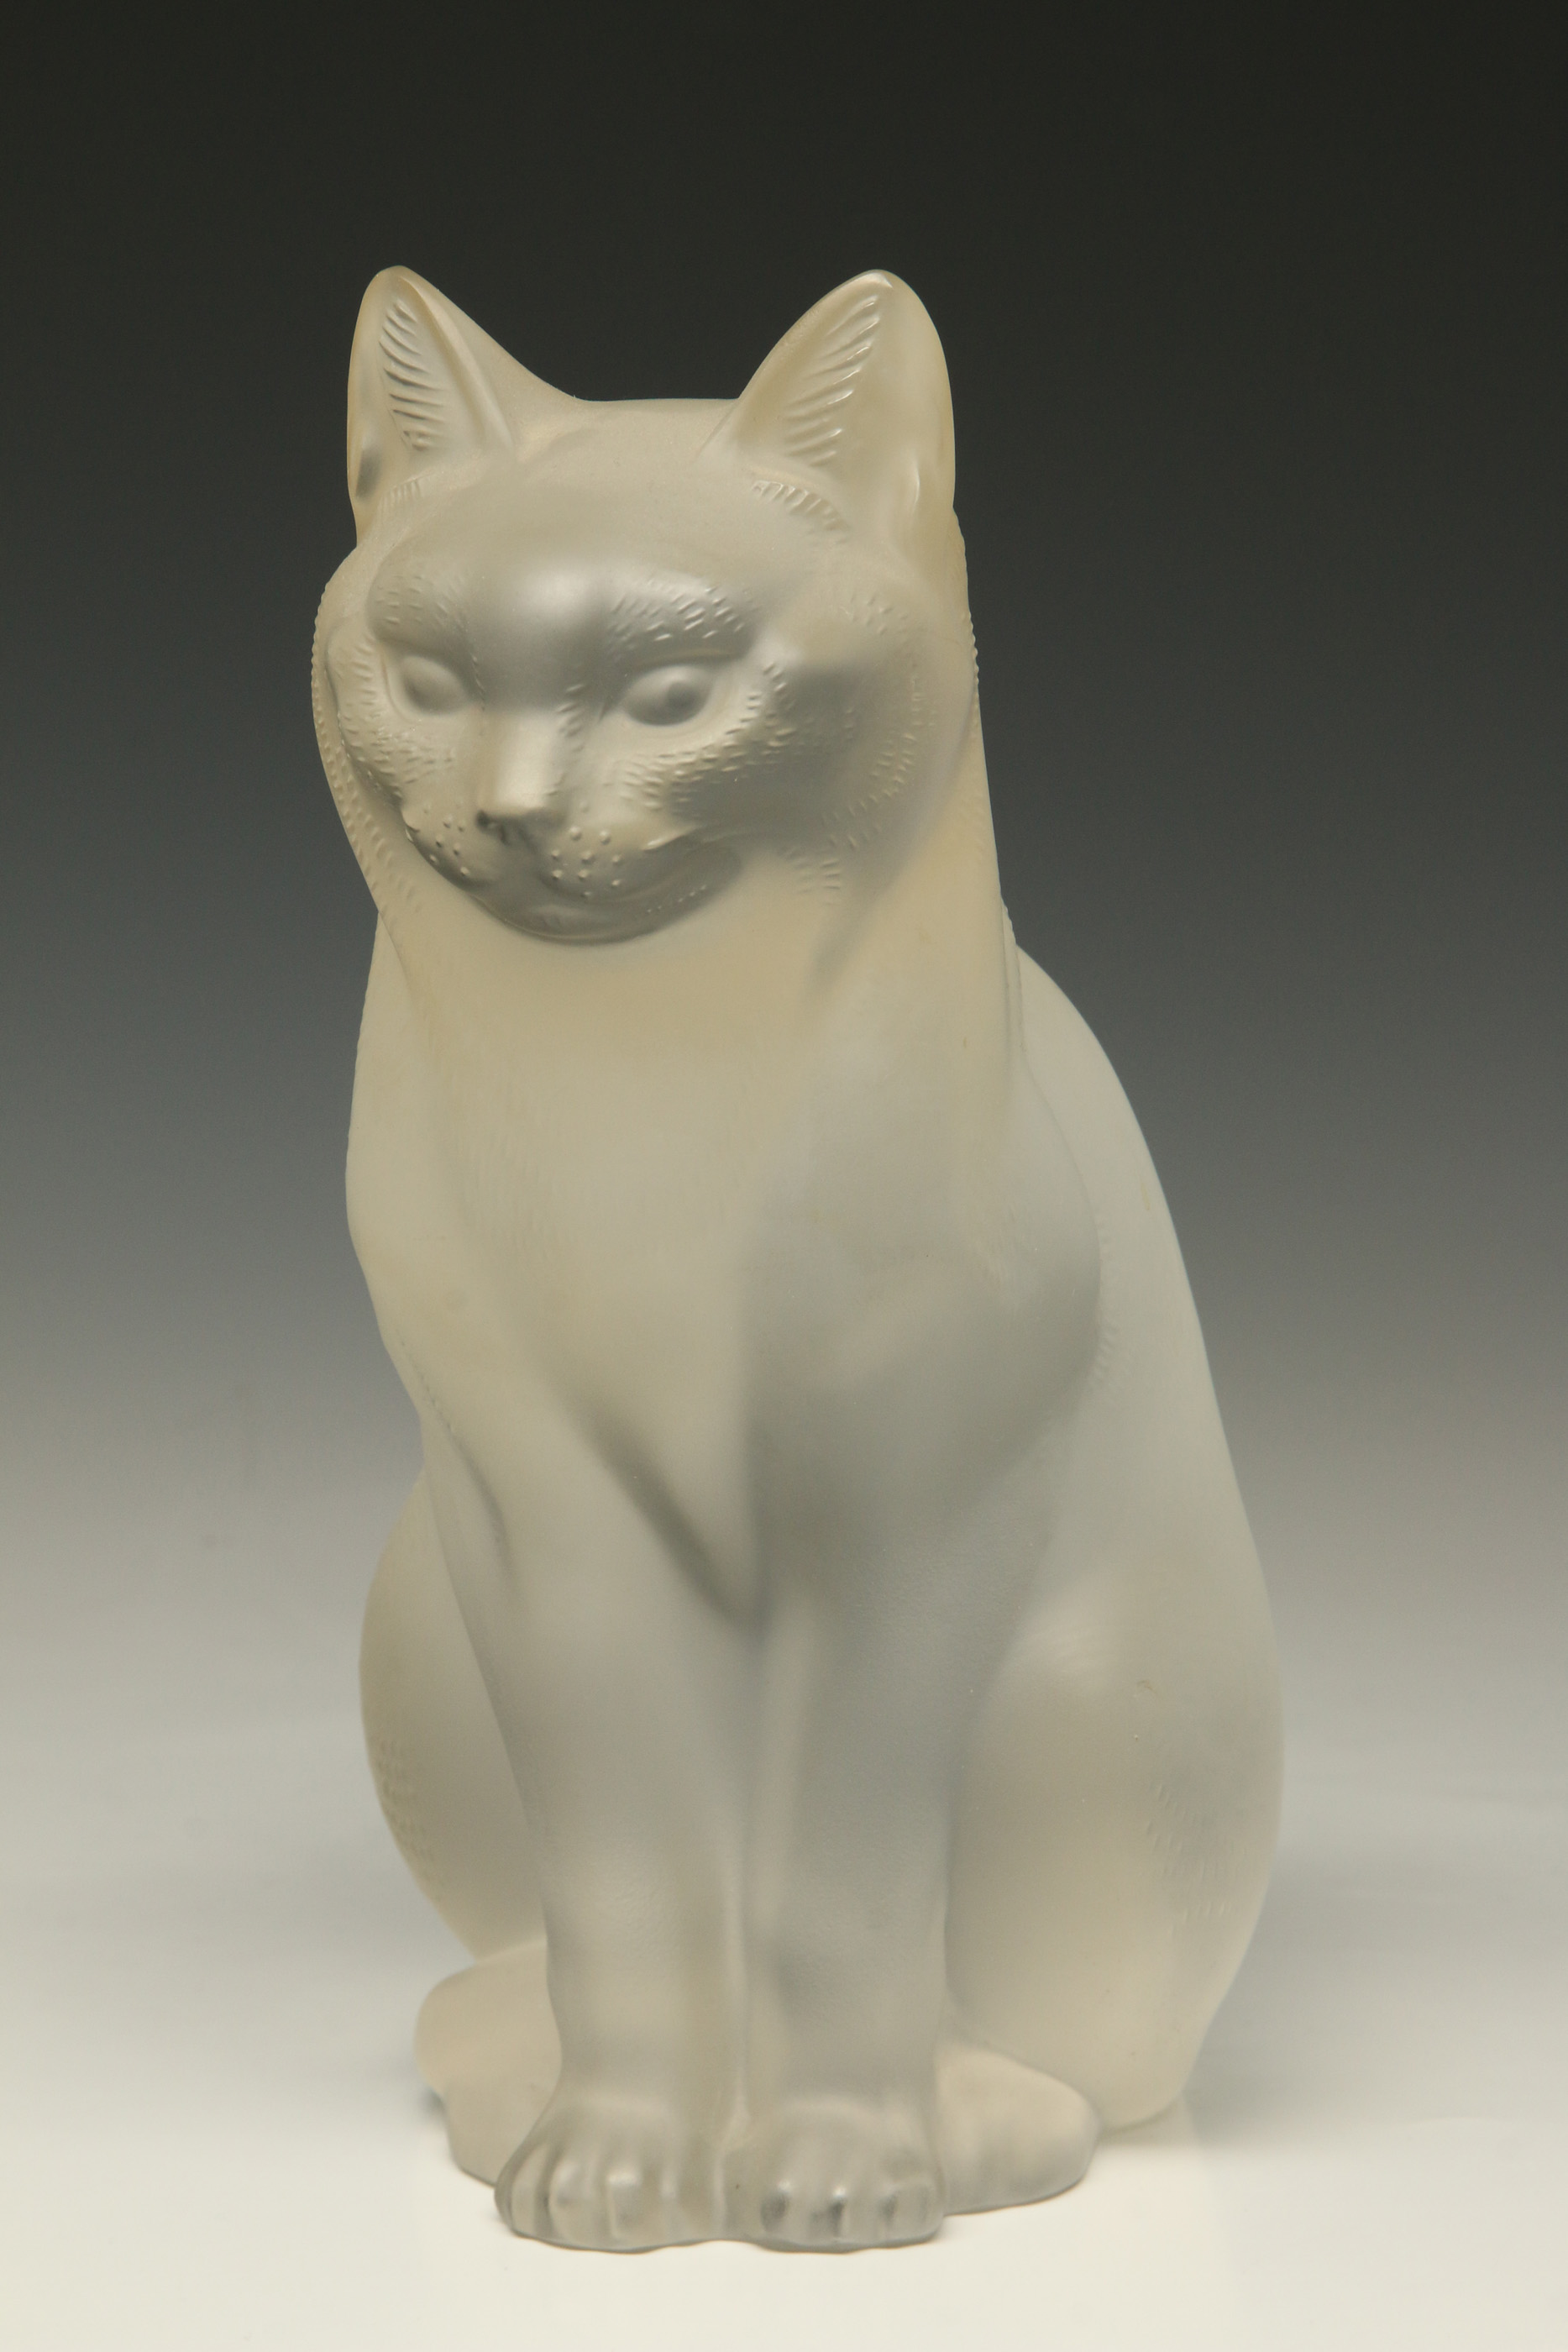 A LALIQUE FRENCH CRYSTAL FIGURE OF A SITTING CAT